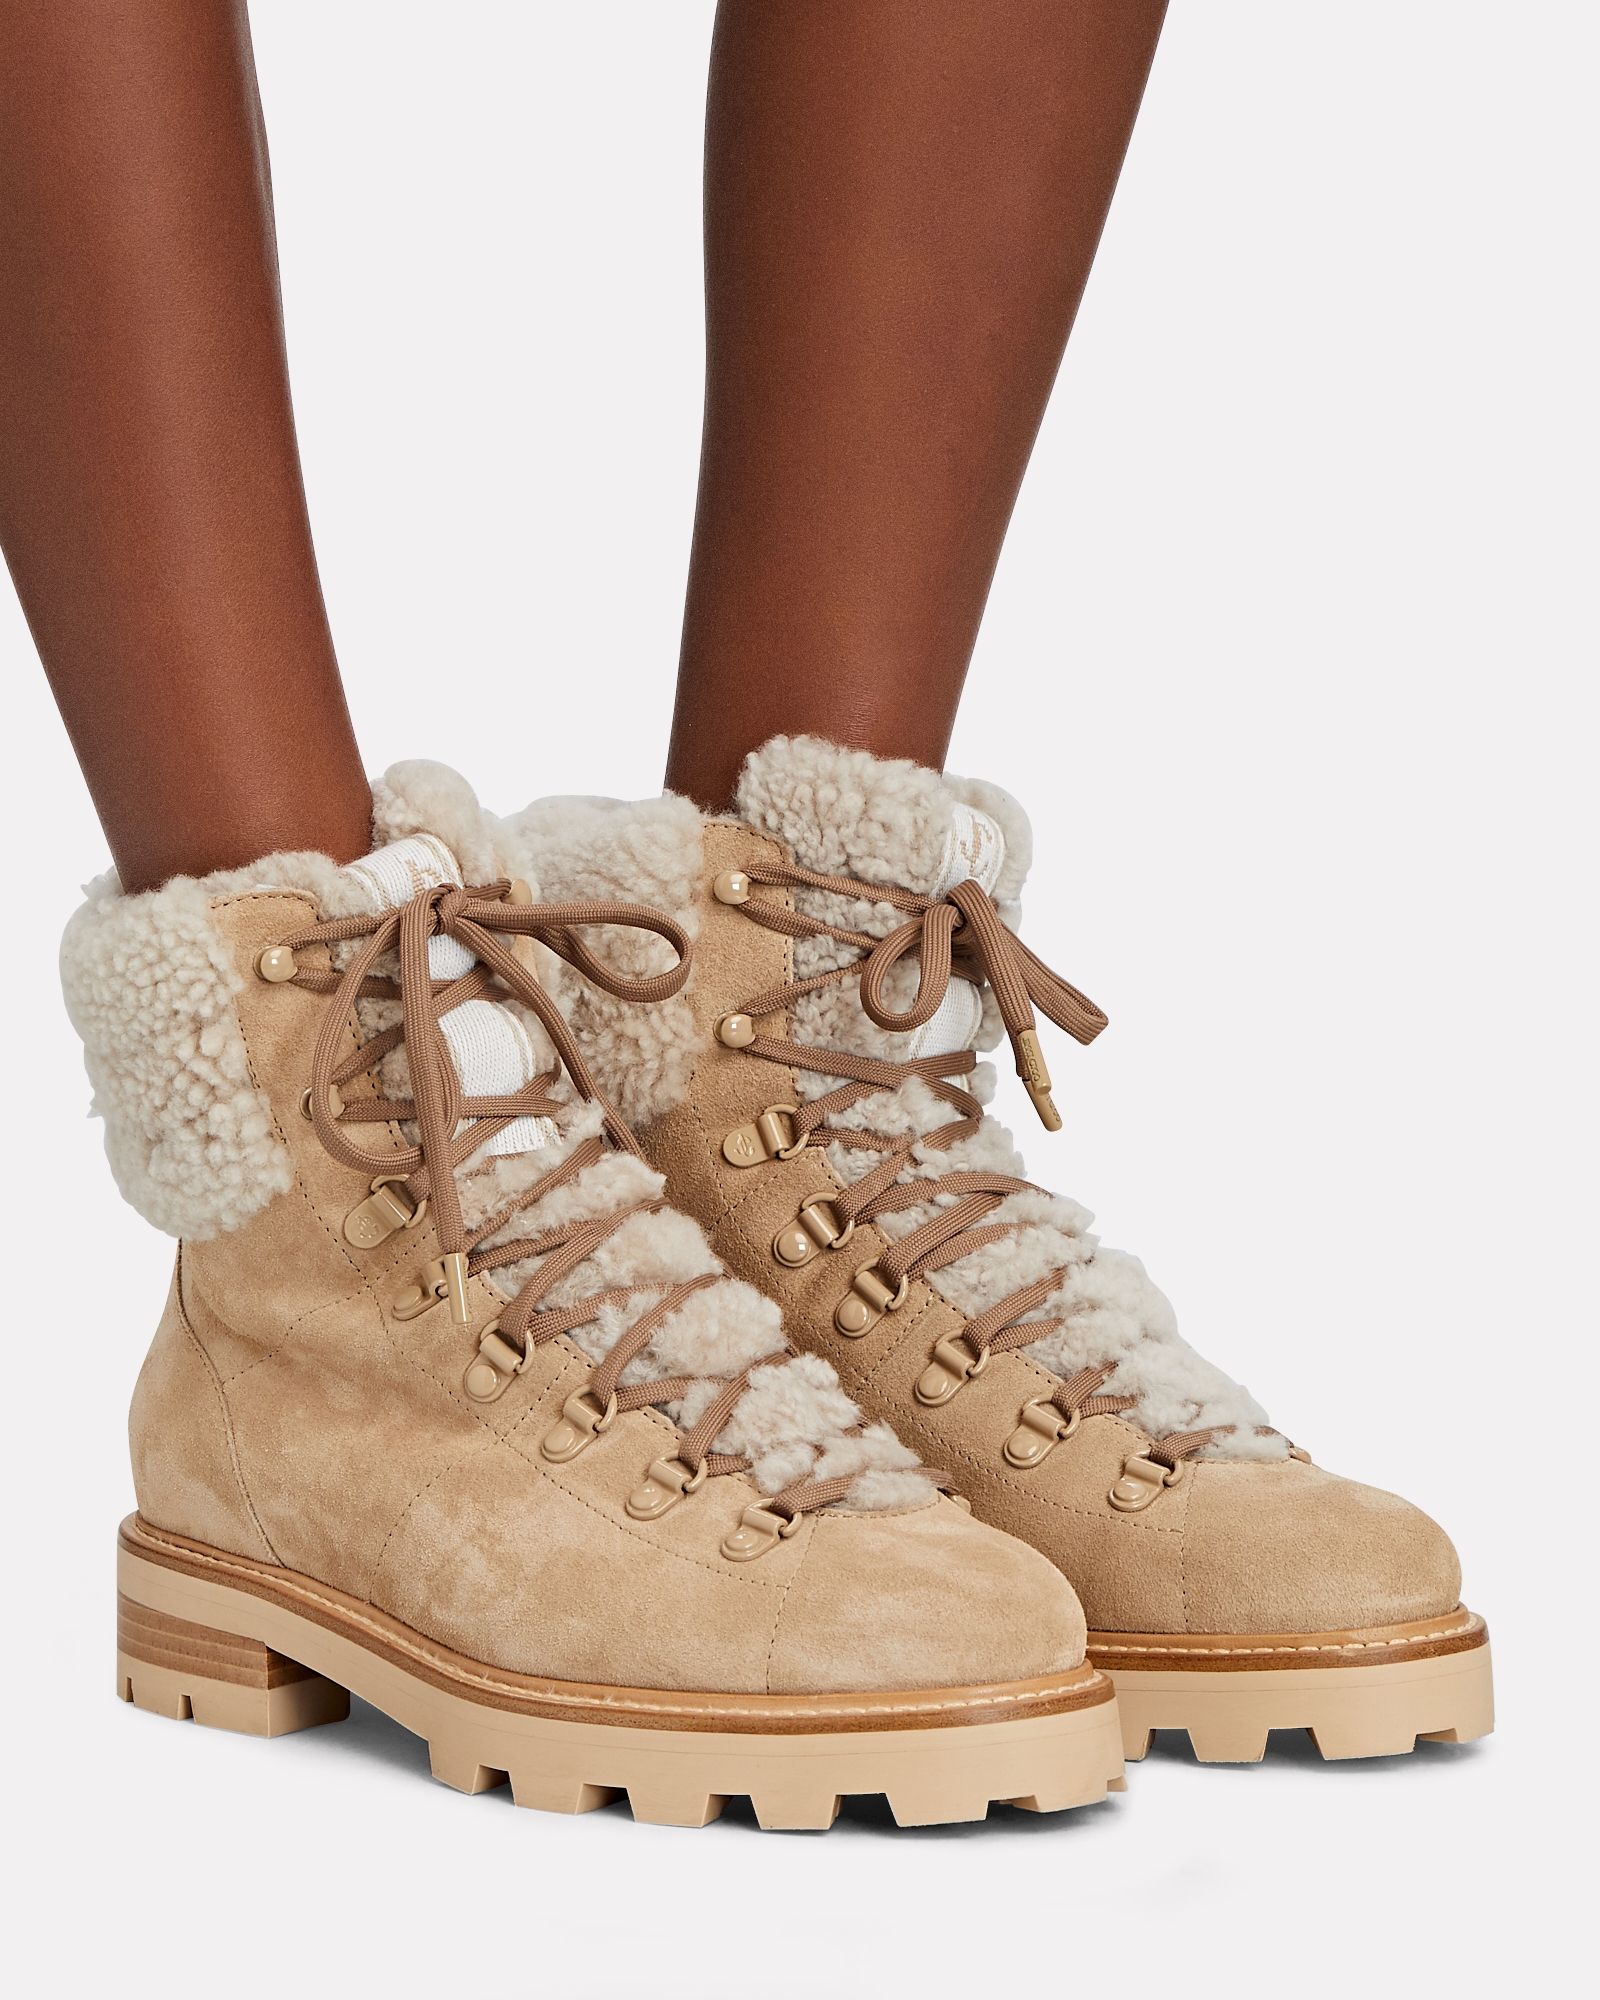 Jimmy Choo Eshe Suede Lace-Up Combat Boots | INTERMIX®